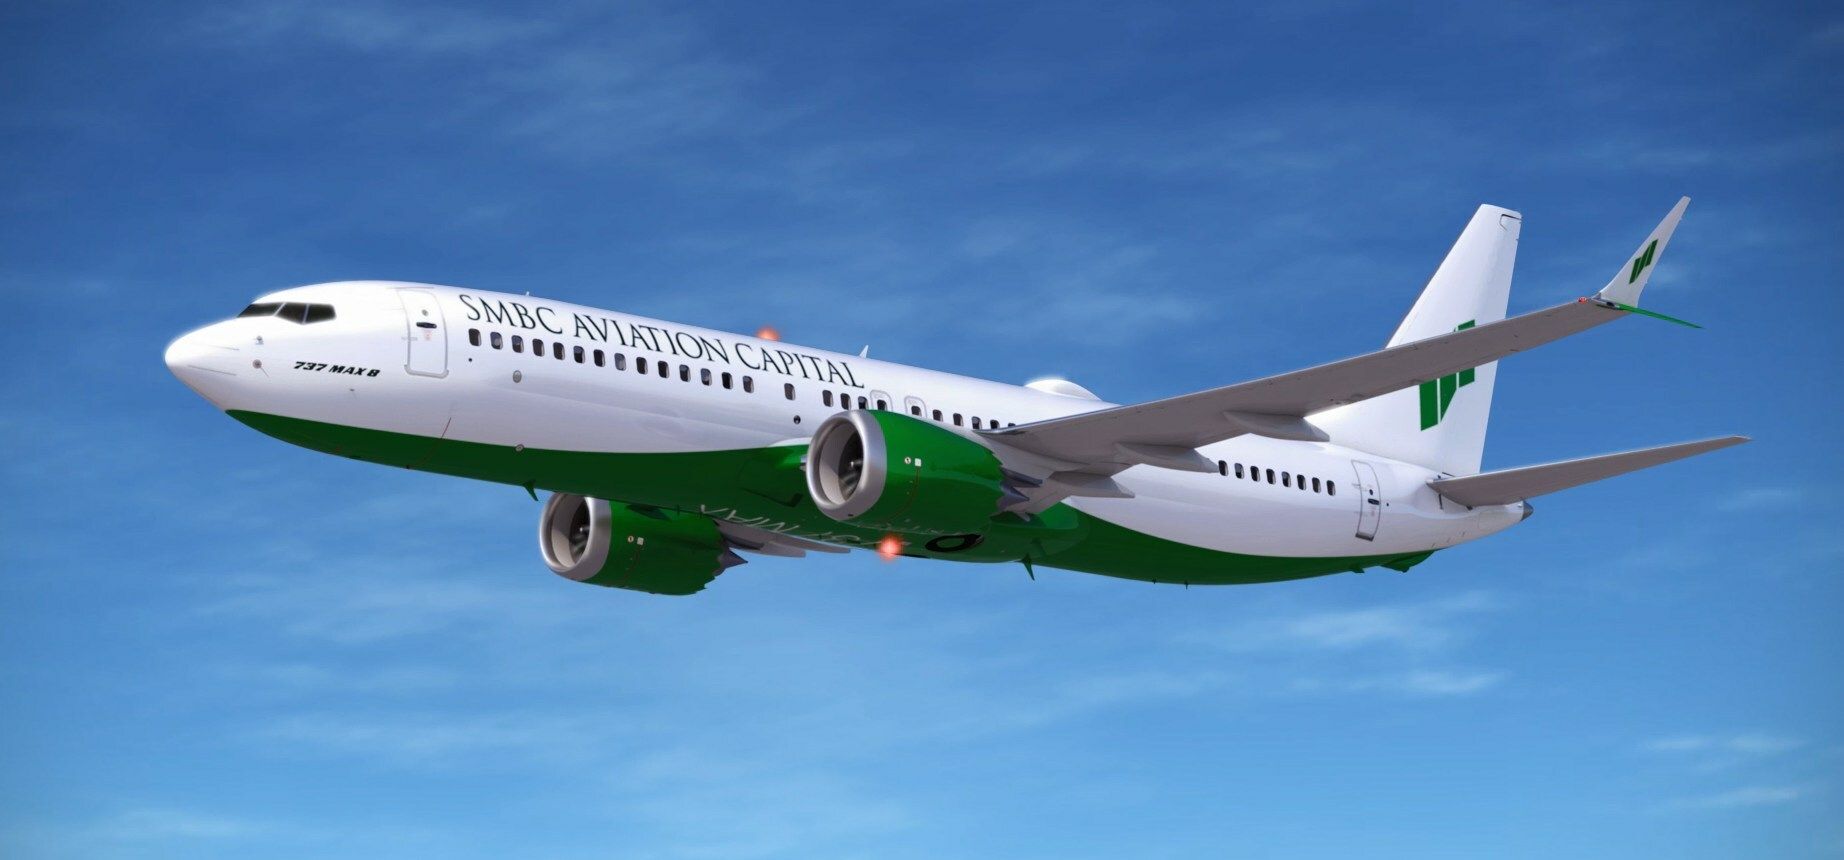 SMBC Aviation Capital Expands Its Boeing 737 MAX Portfolio with a New Order of 25 Jets